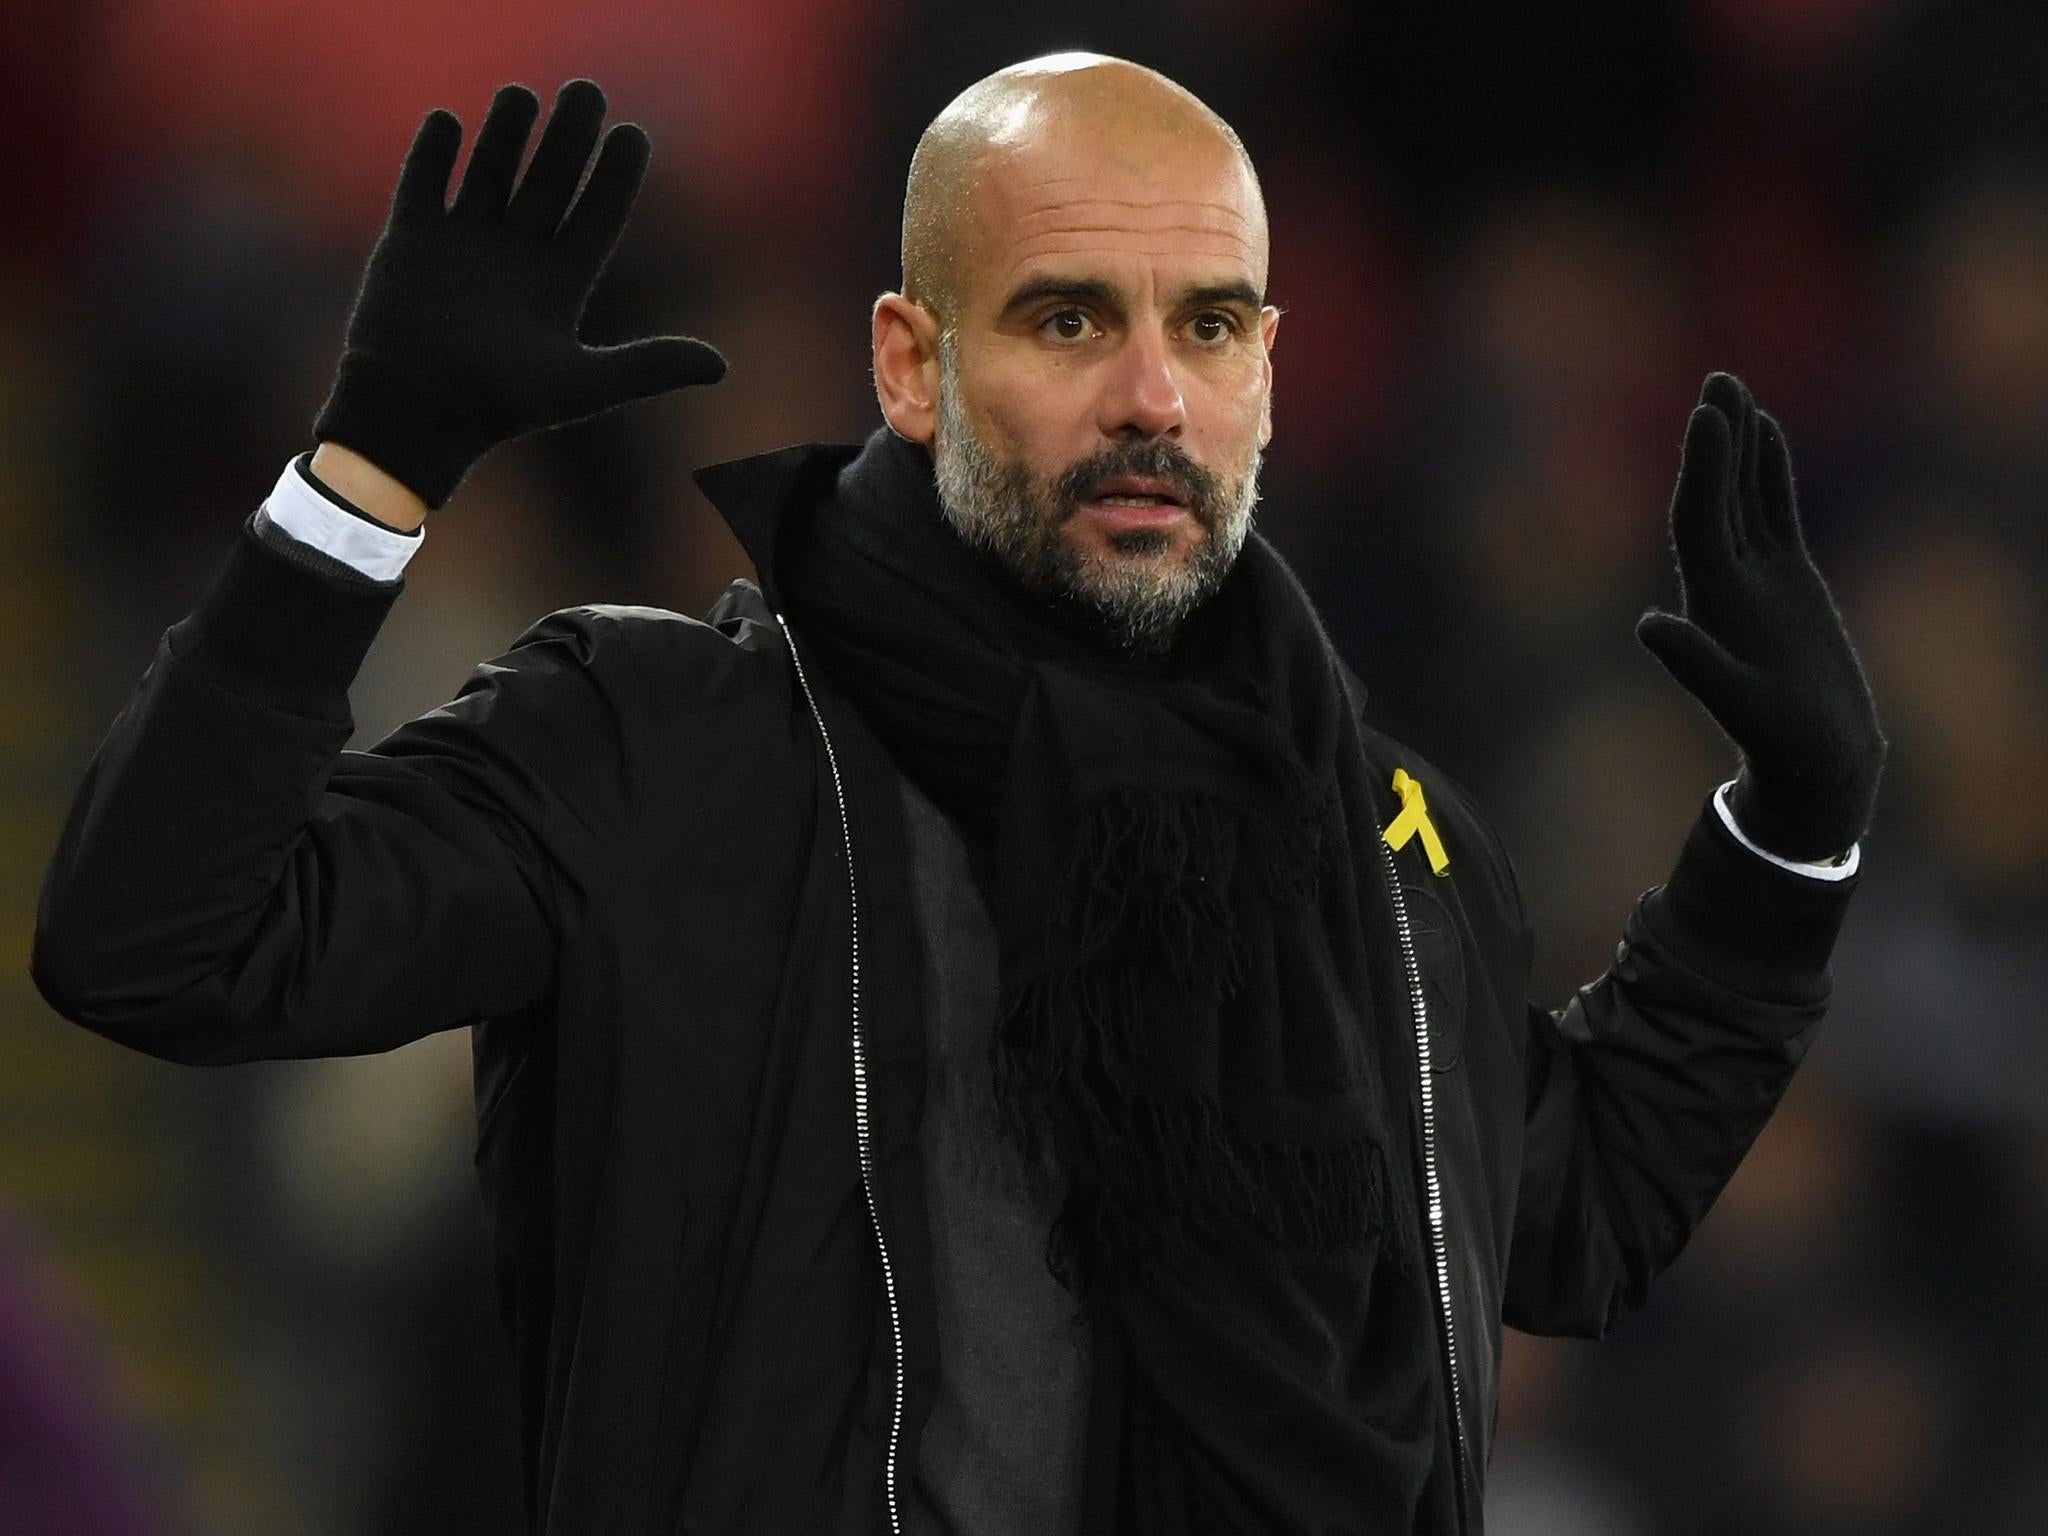 Pep Guardiola fanned the flames of the Manchester derby by ignoring United in favour of praising Spurs and Chelsea